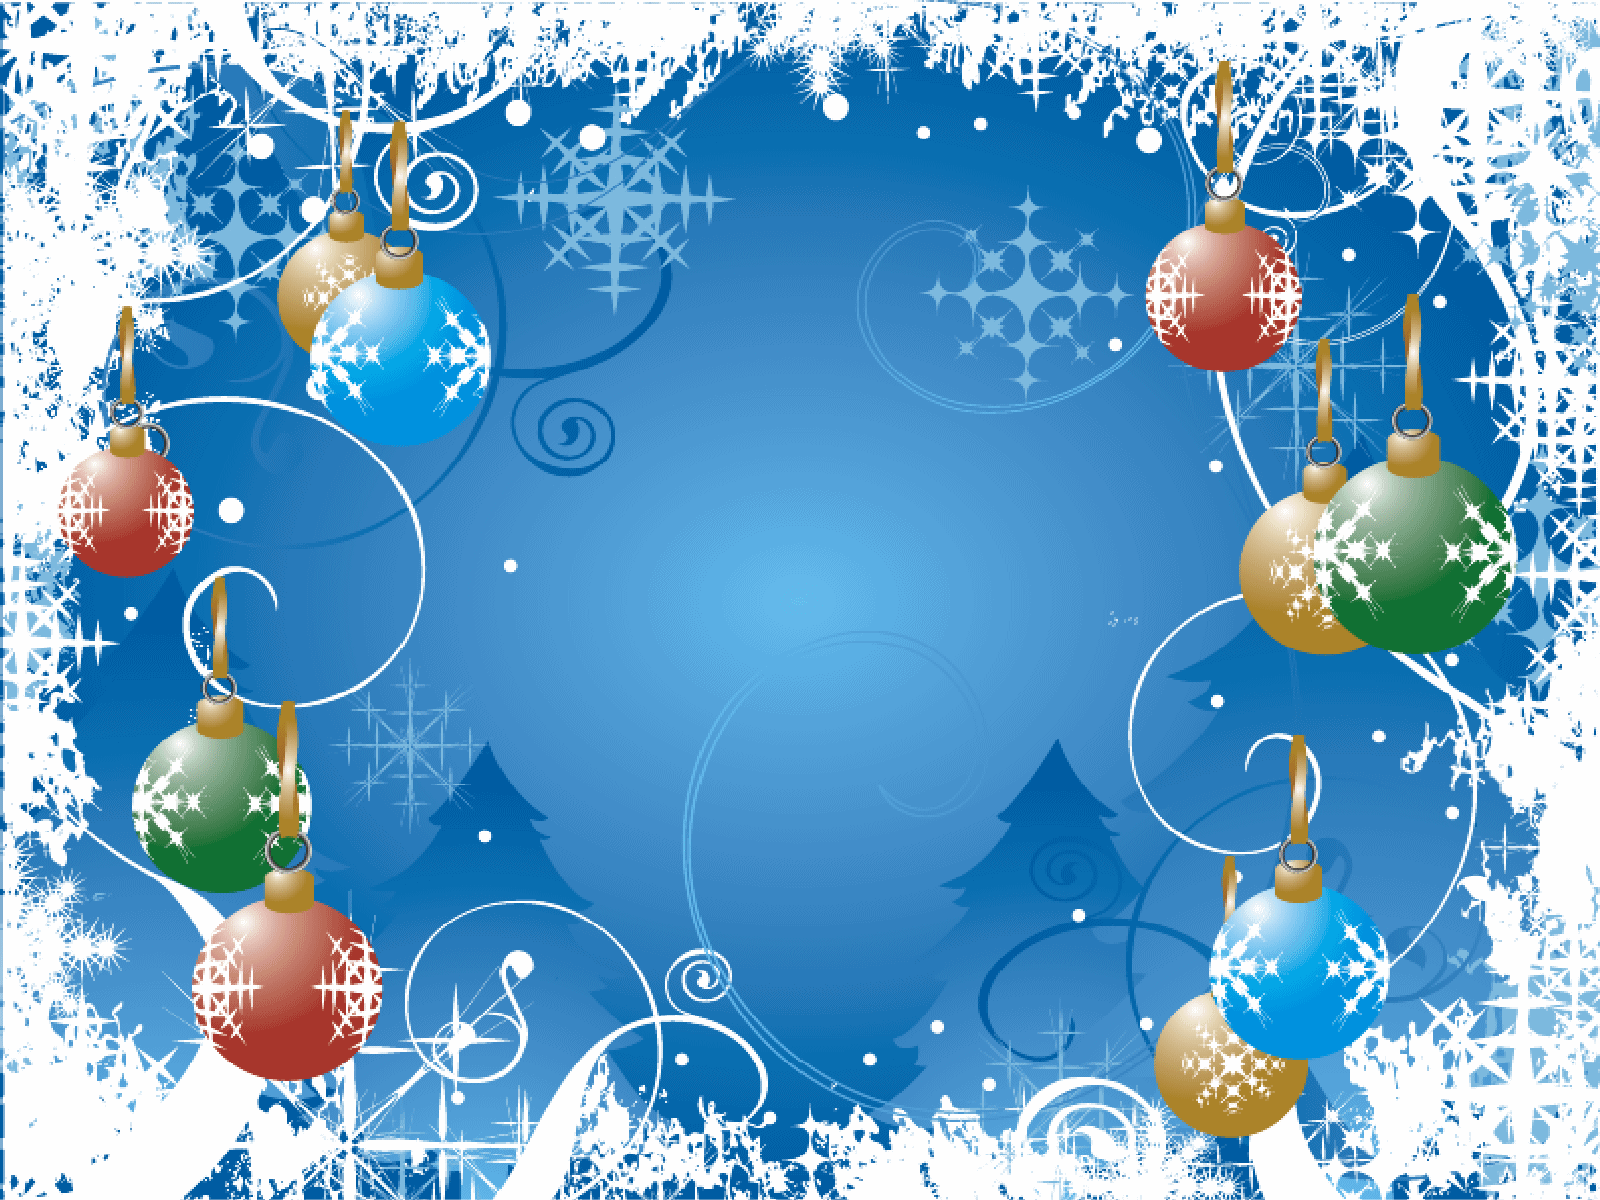 Xmas Backgrounds Free - Wallpaper Cave